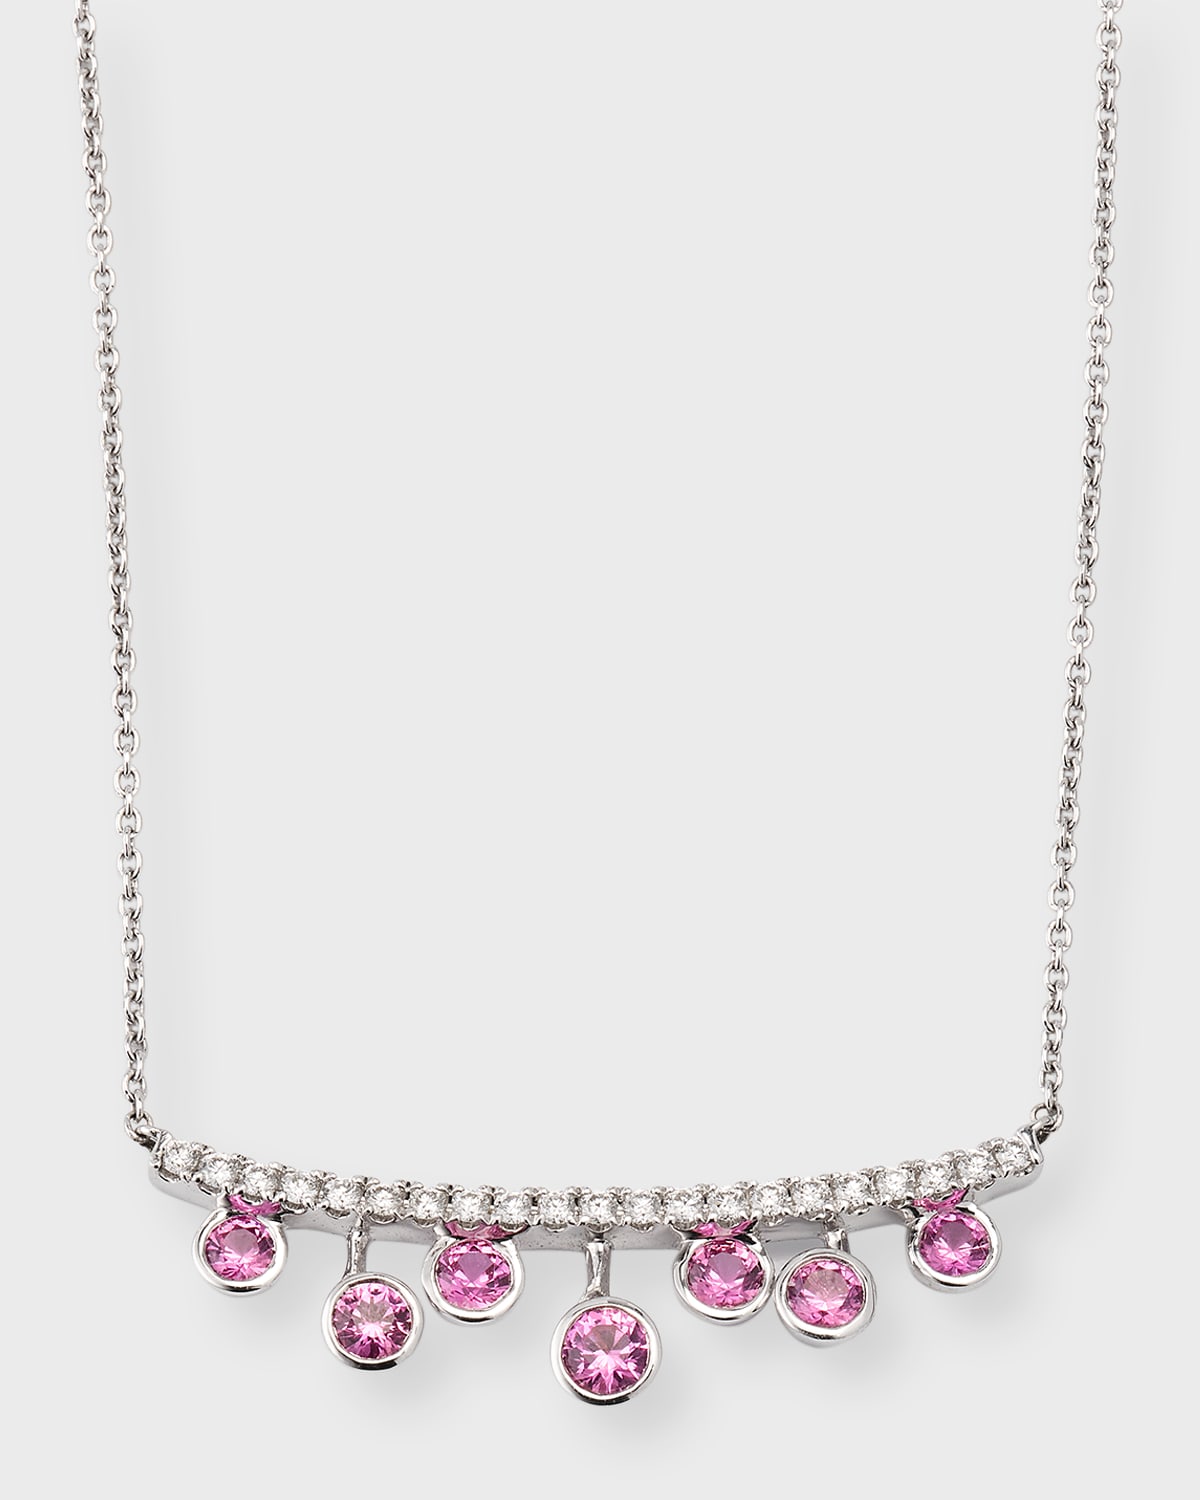 18K White Gold Pink Sapphire Bar Necklace with Diamonds